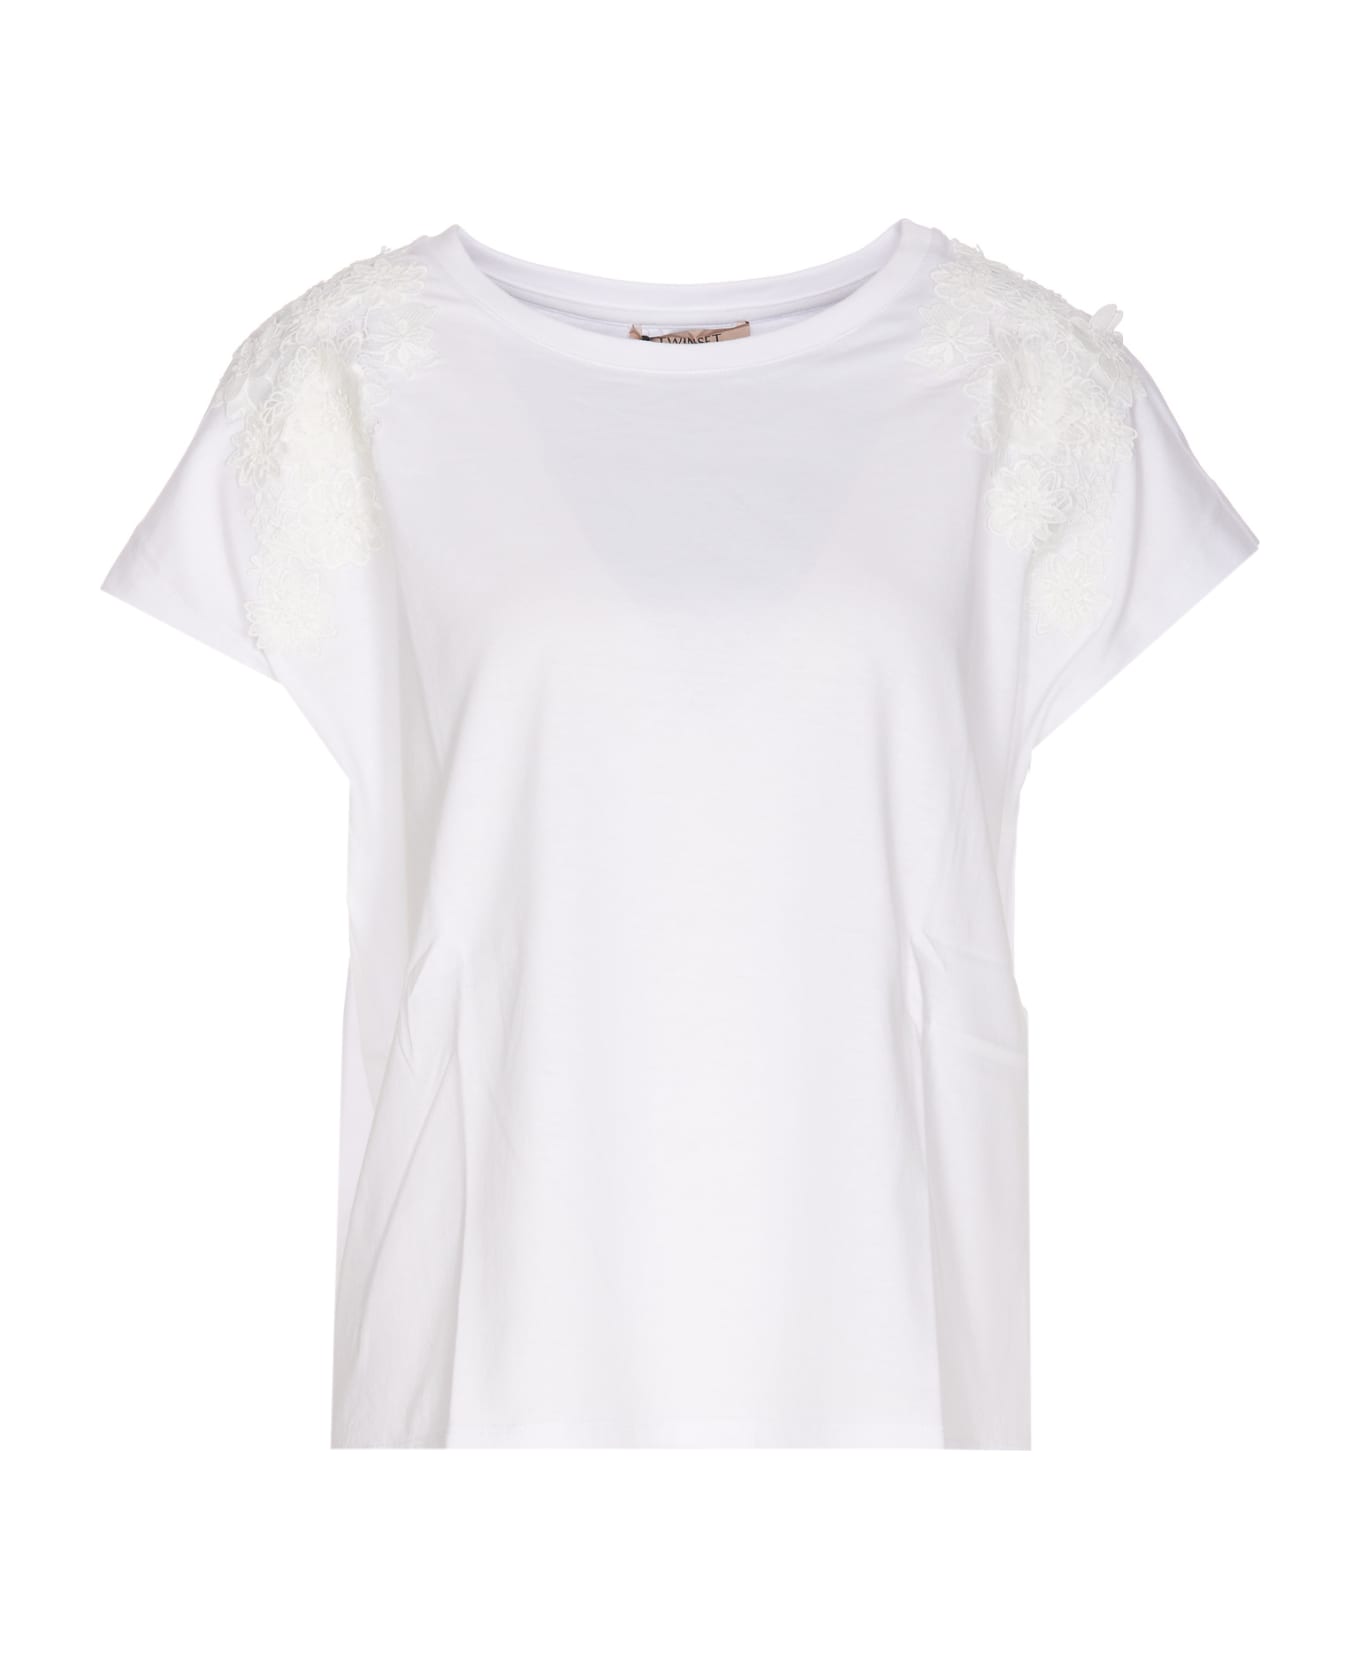 TwinSet T-shirt With Lace Details - Bianco Ottico